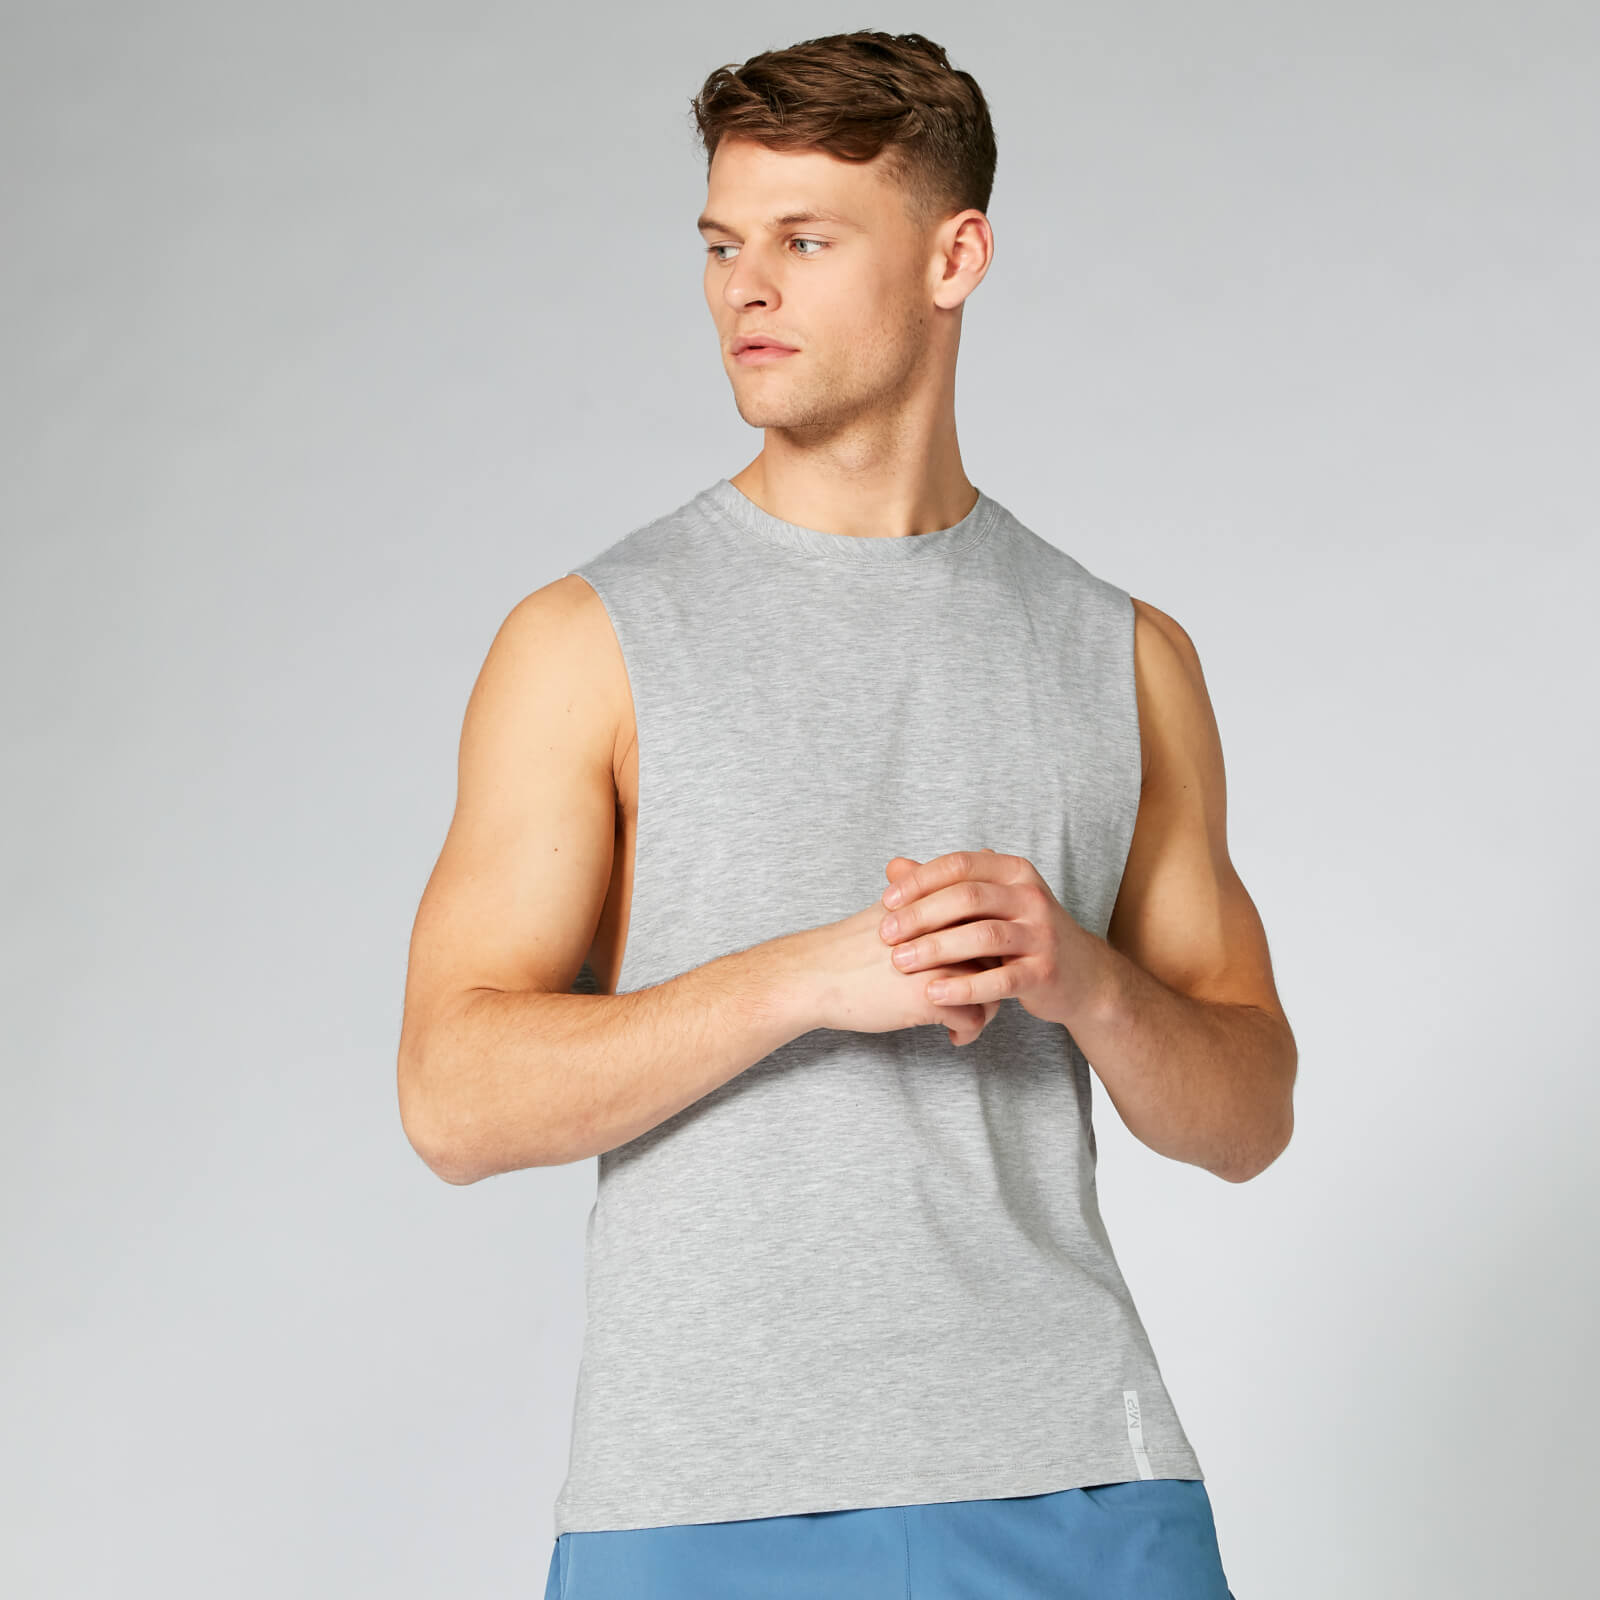 Myprotein Luxe Classic Drop Armhole Tank Top - Silver - S